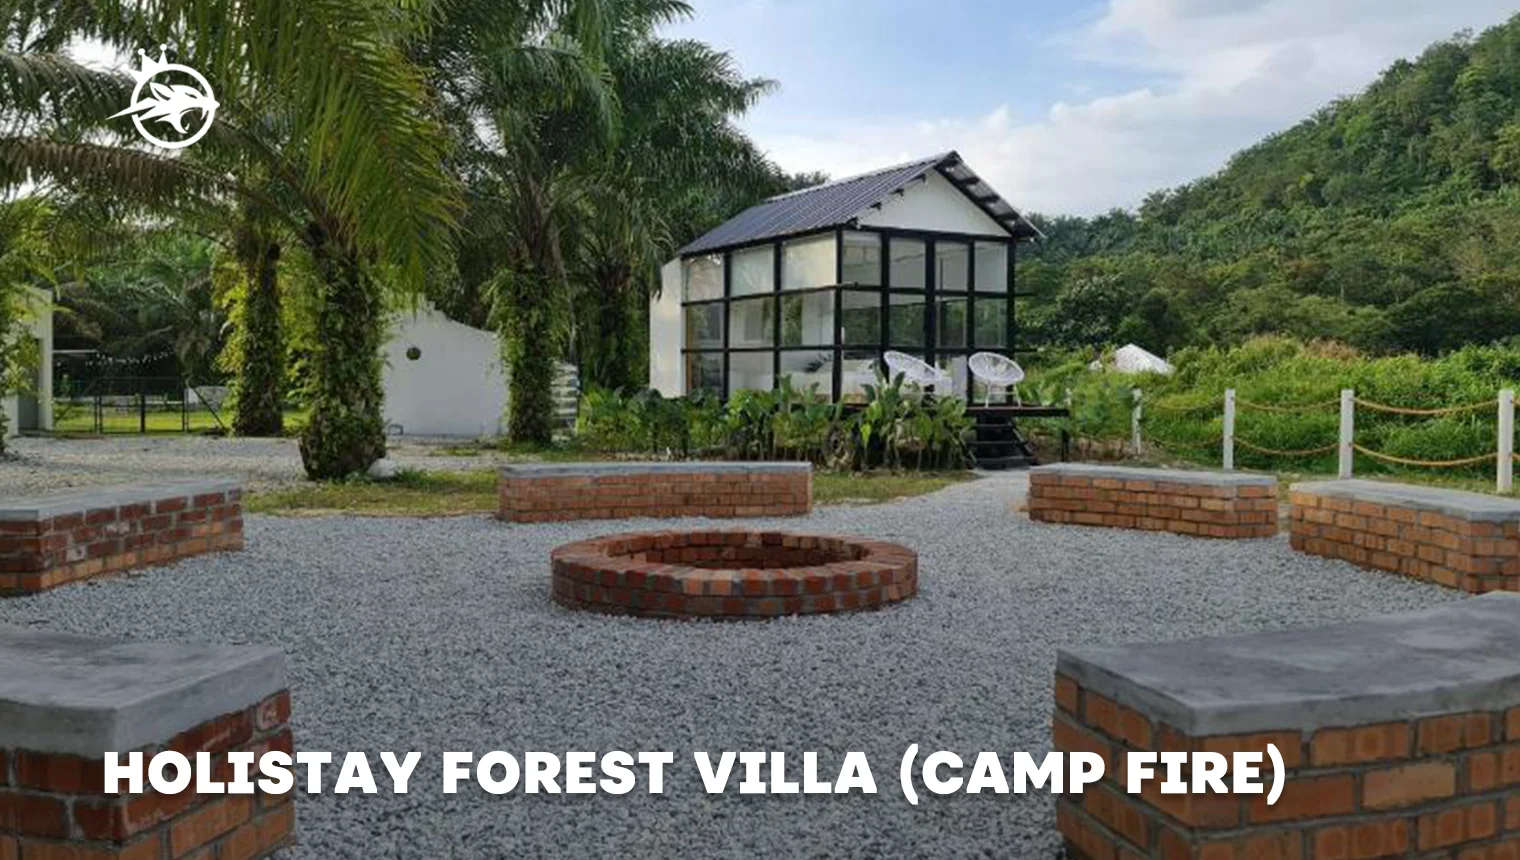 Holistay Forest Villa (Camp Fire)